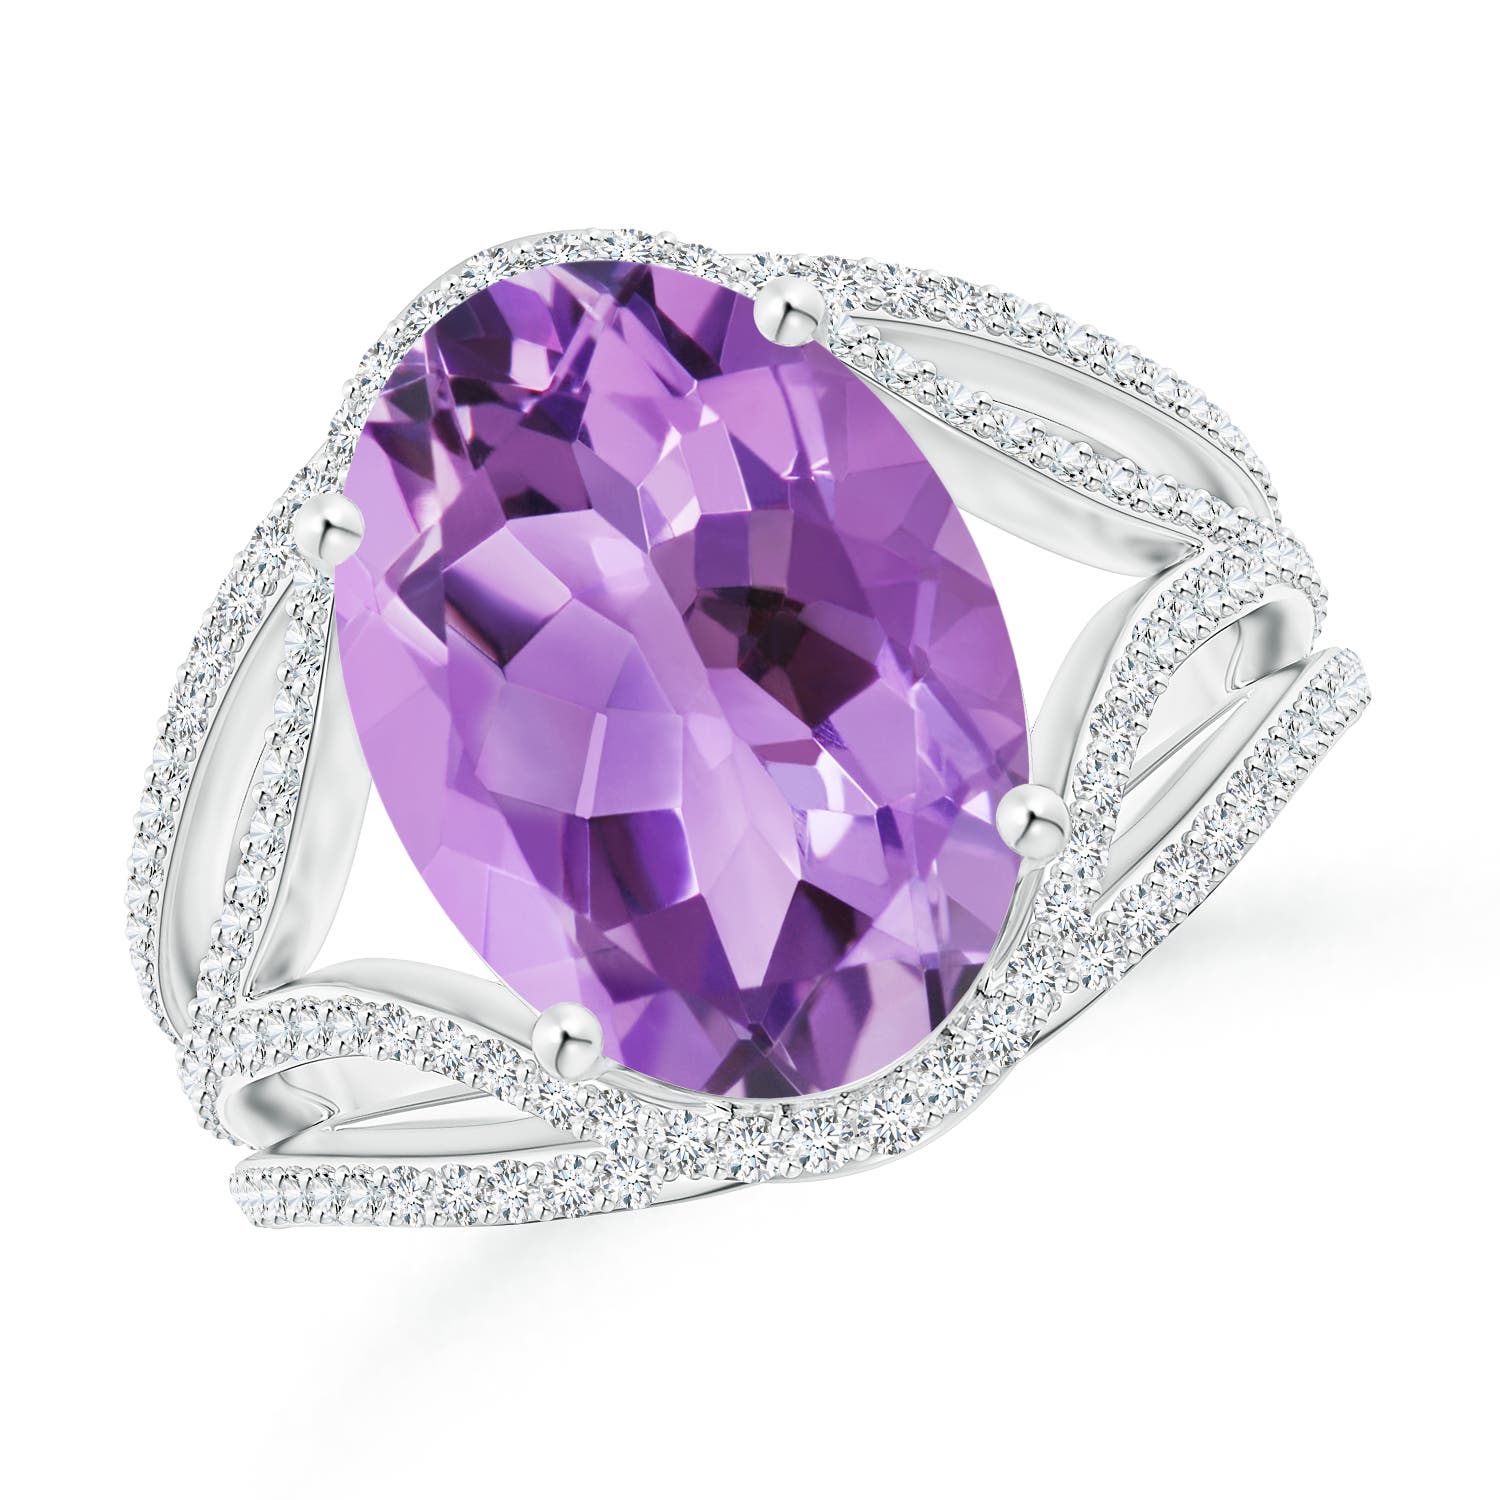 A - Amethyst / 5.89 CT / 14 KT White Gold